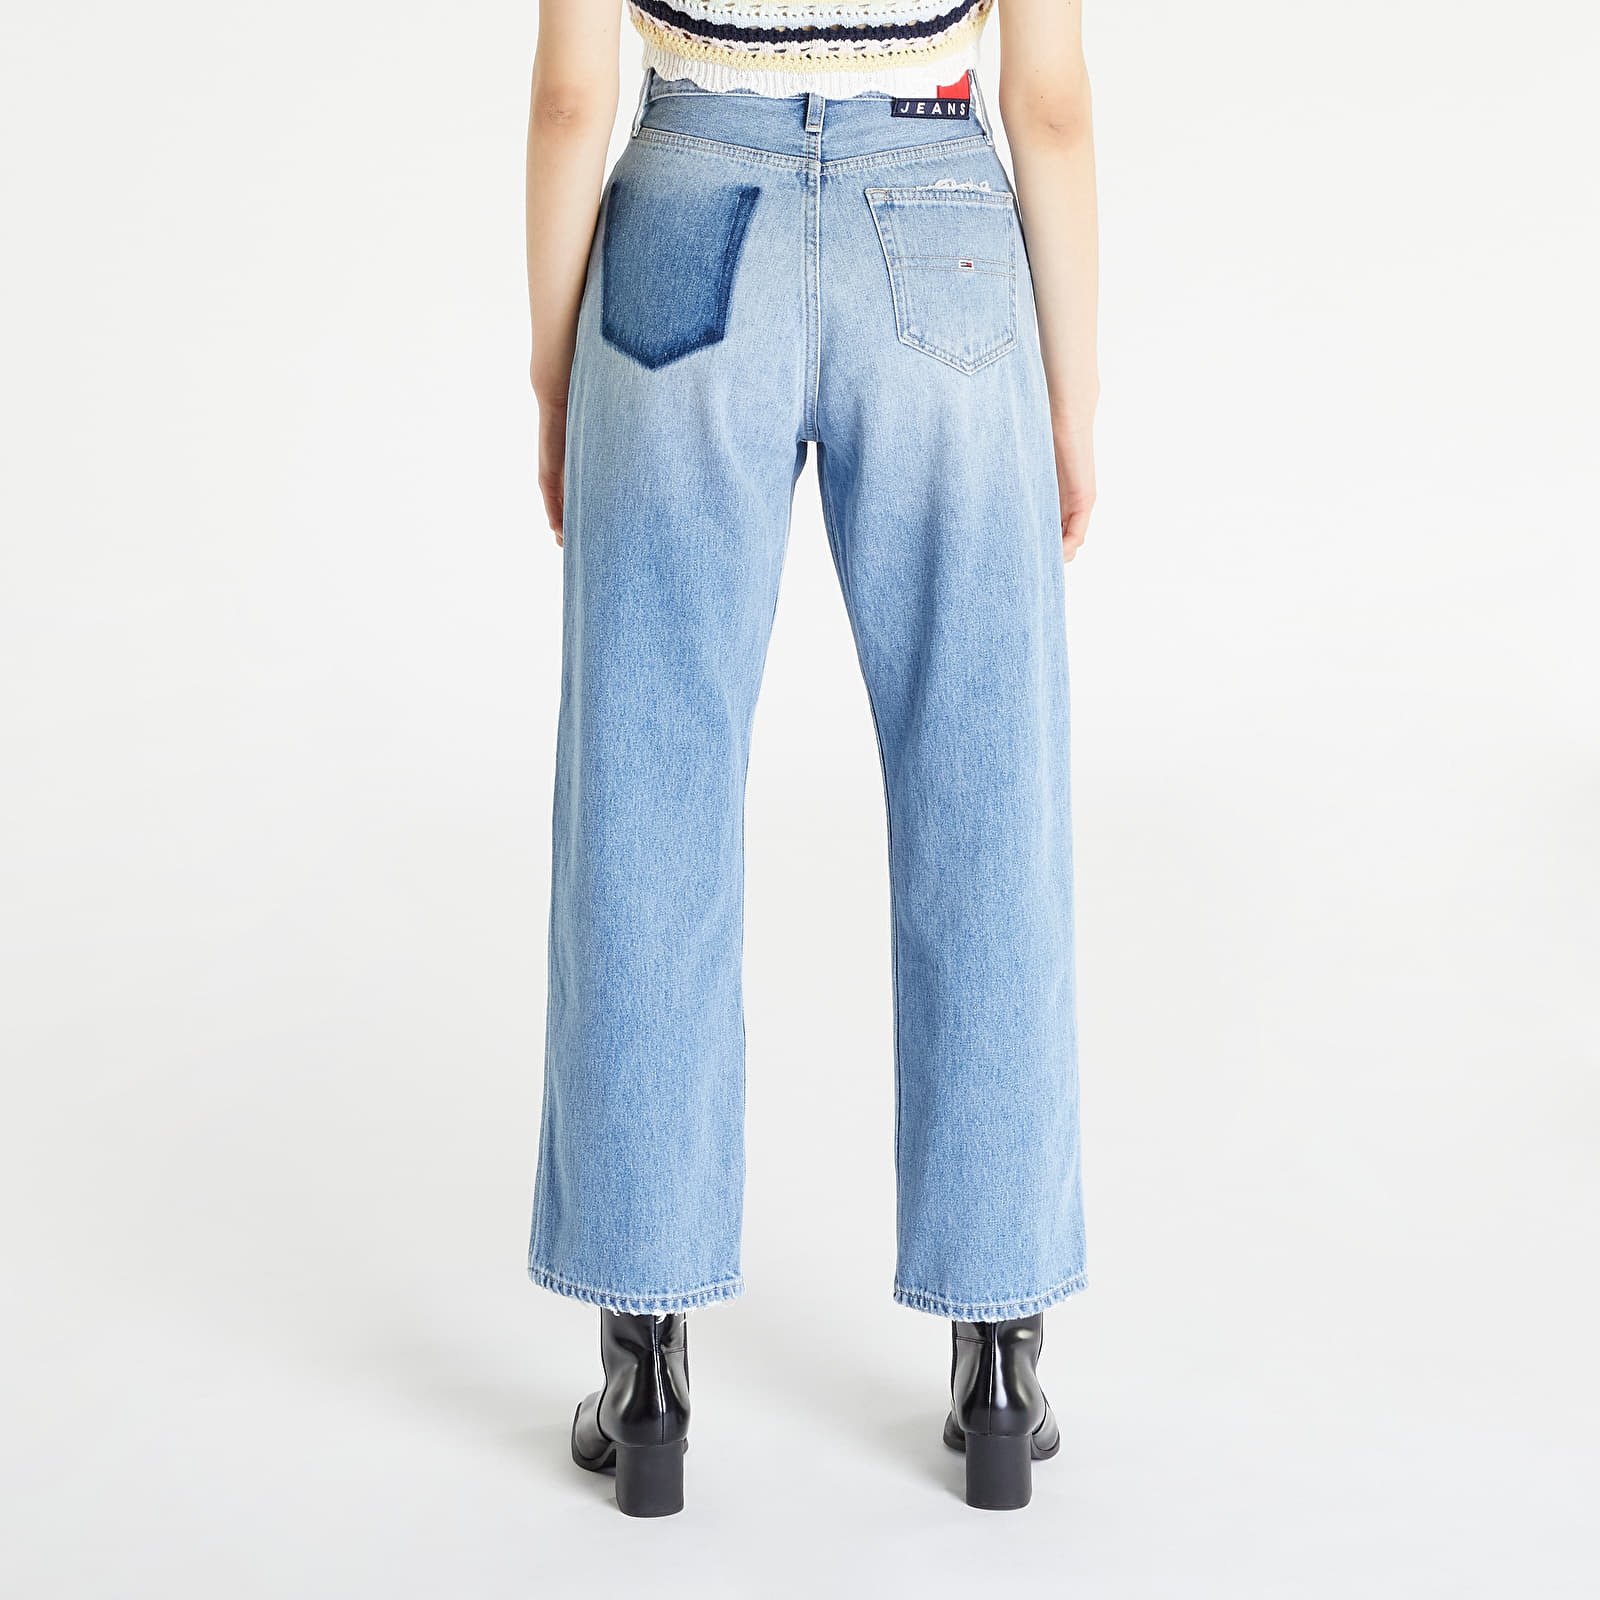 Tommy Hilfiger - Tommy Jeans Betsy Mid Rise Loose Jeans Denim Light